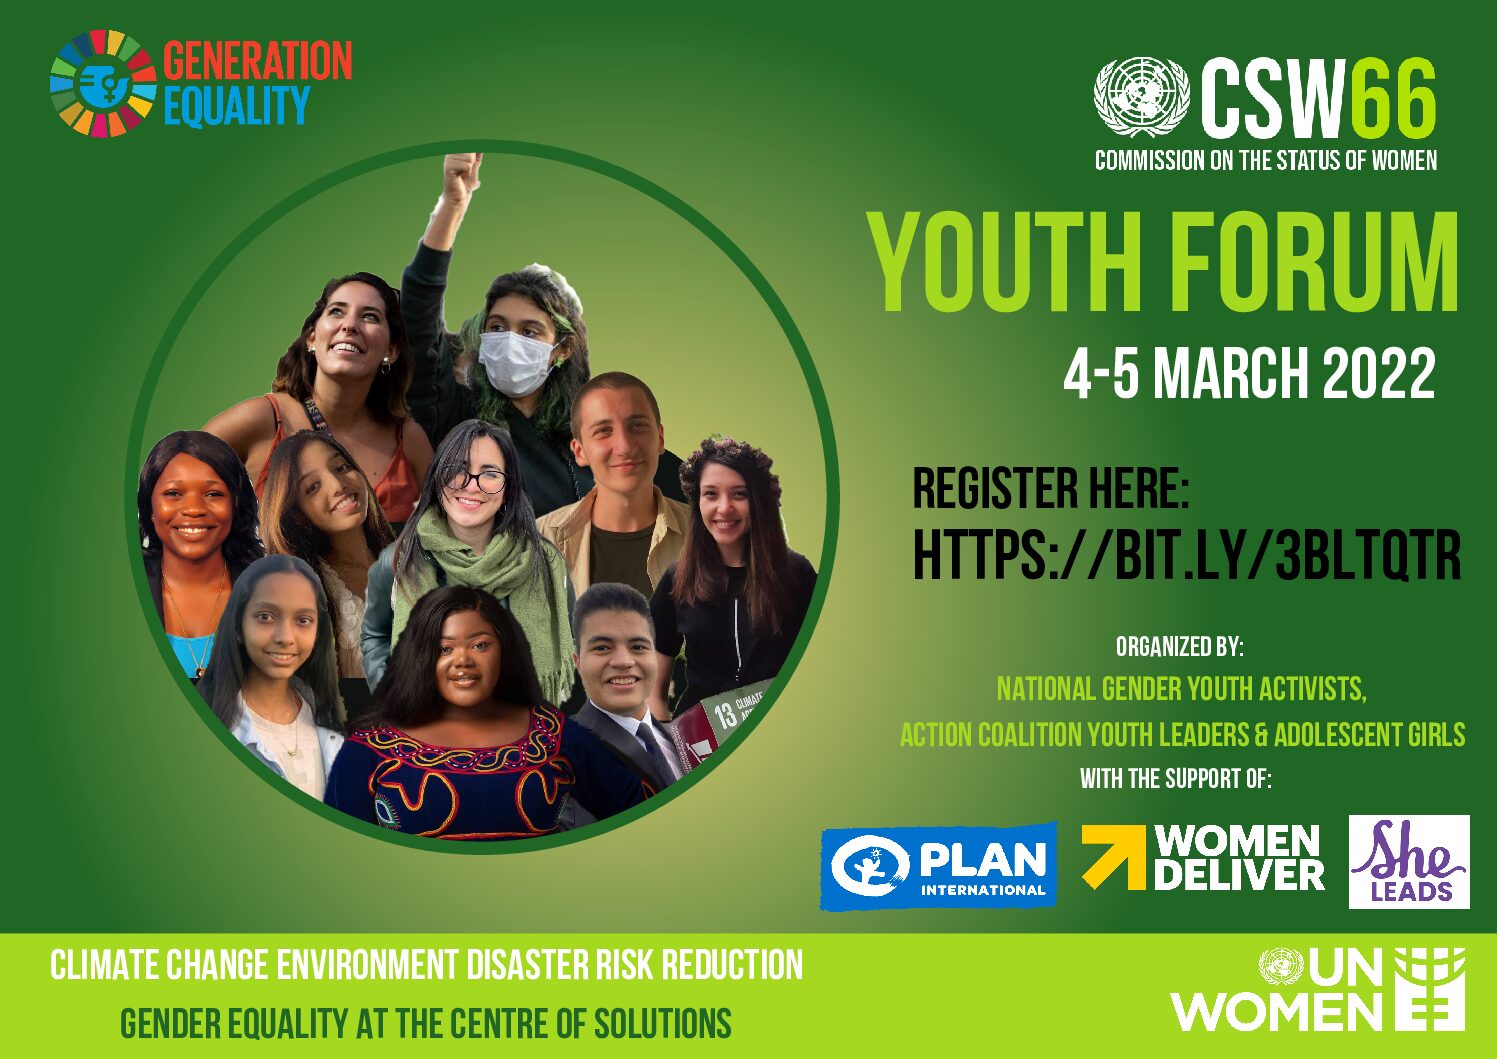 Registration Open for the Virtual Youth Forum at CSW66